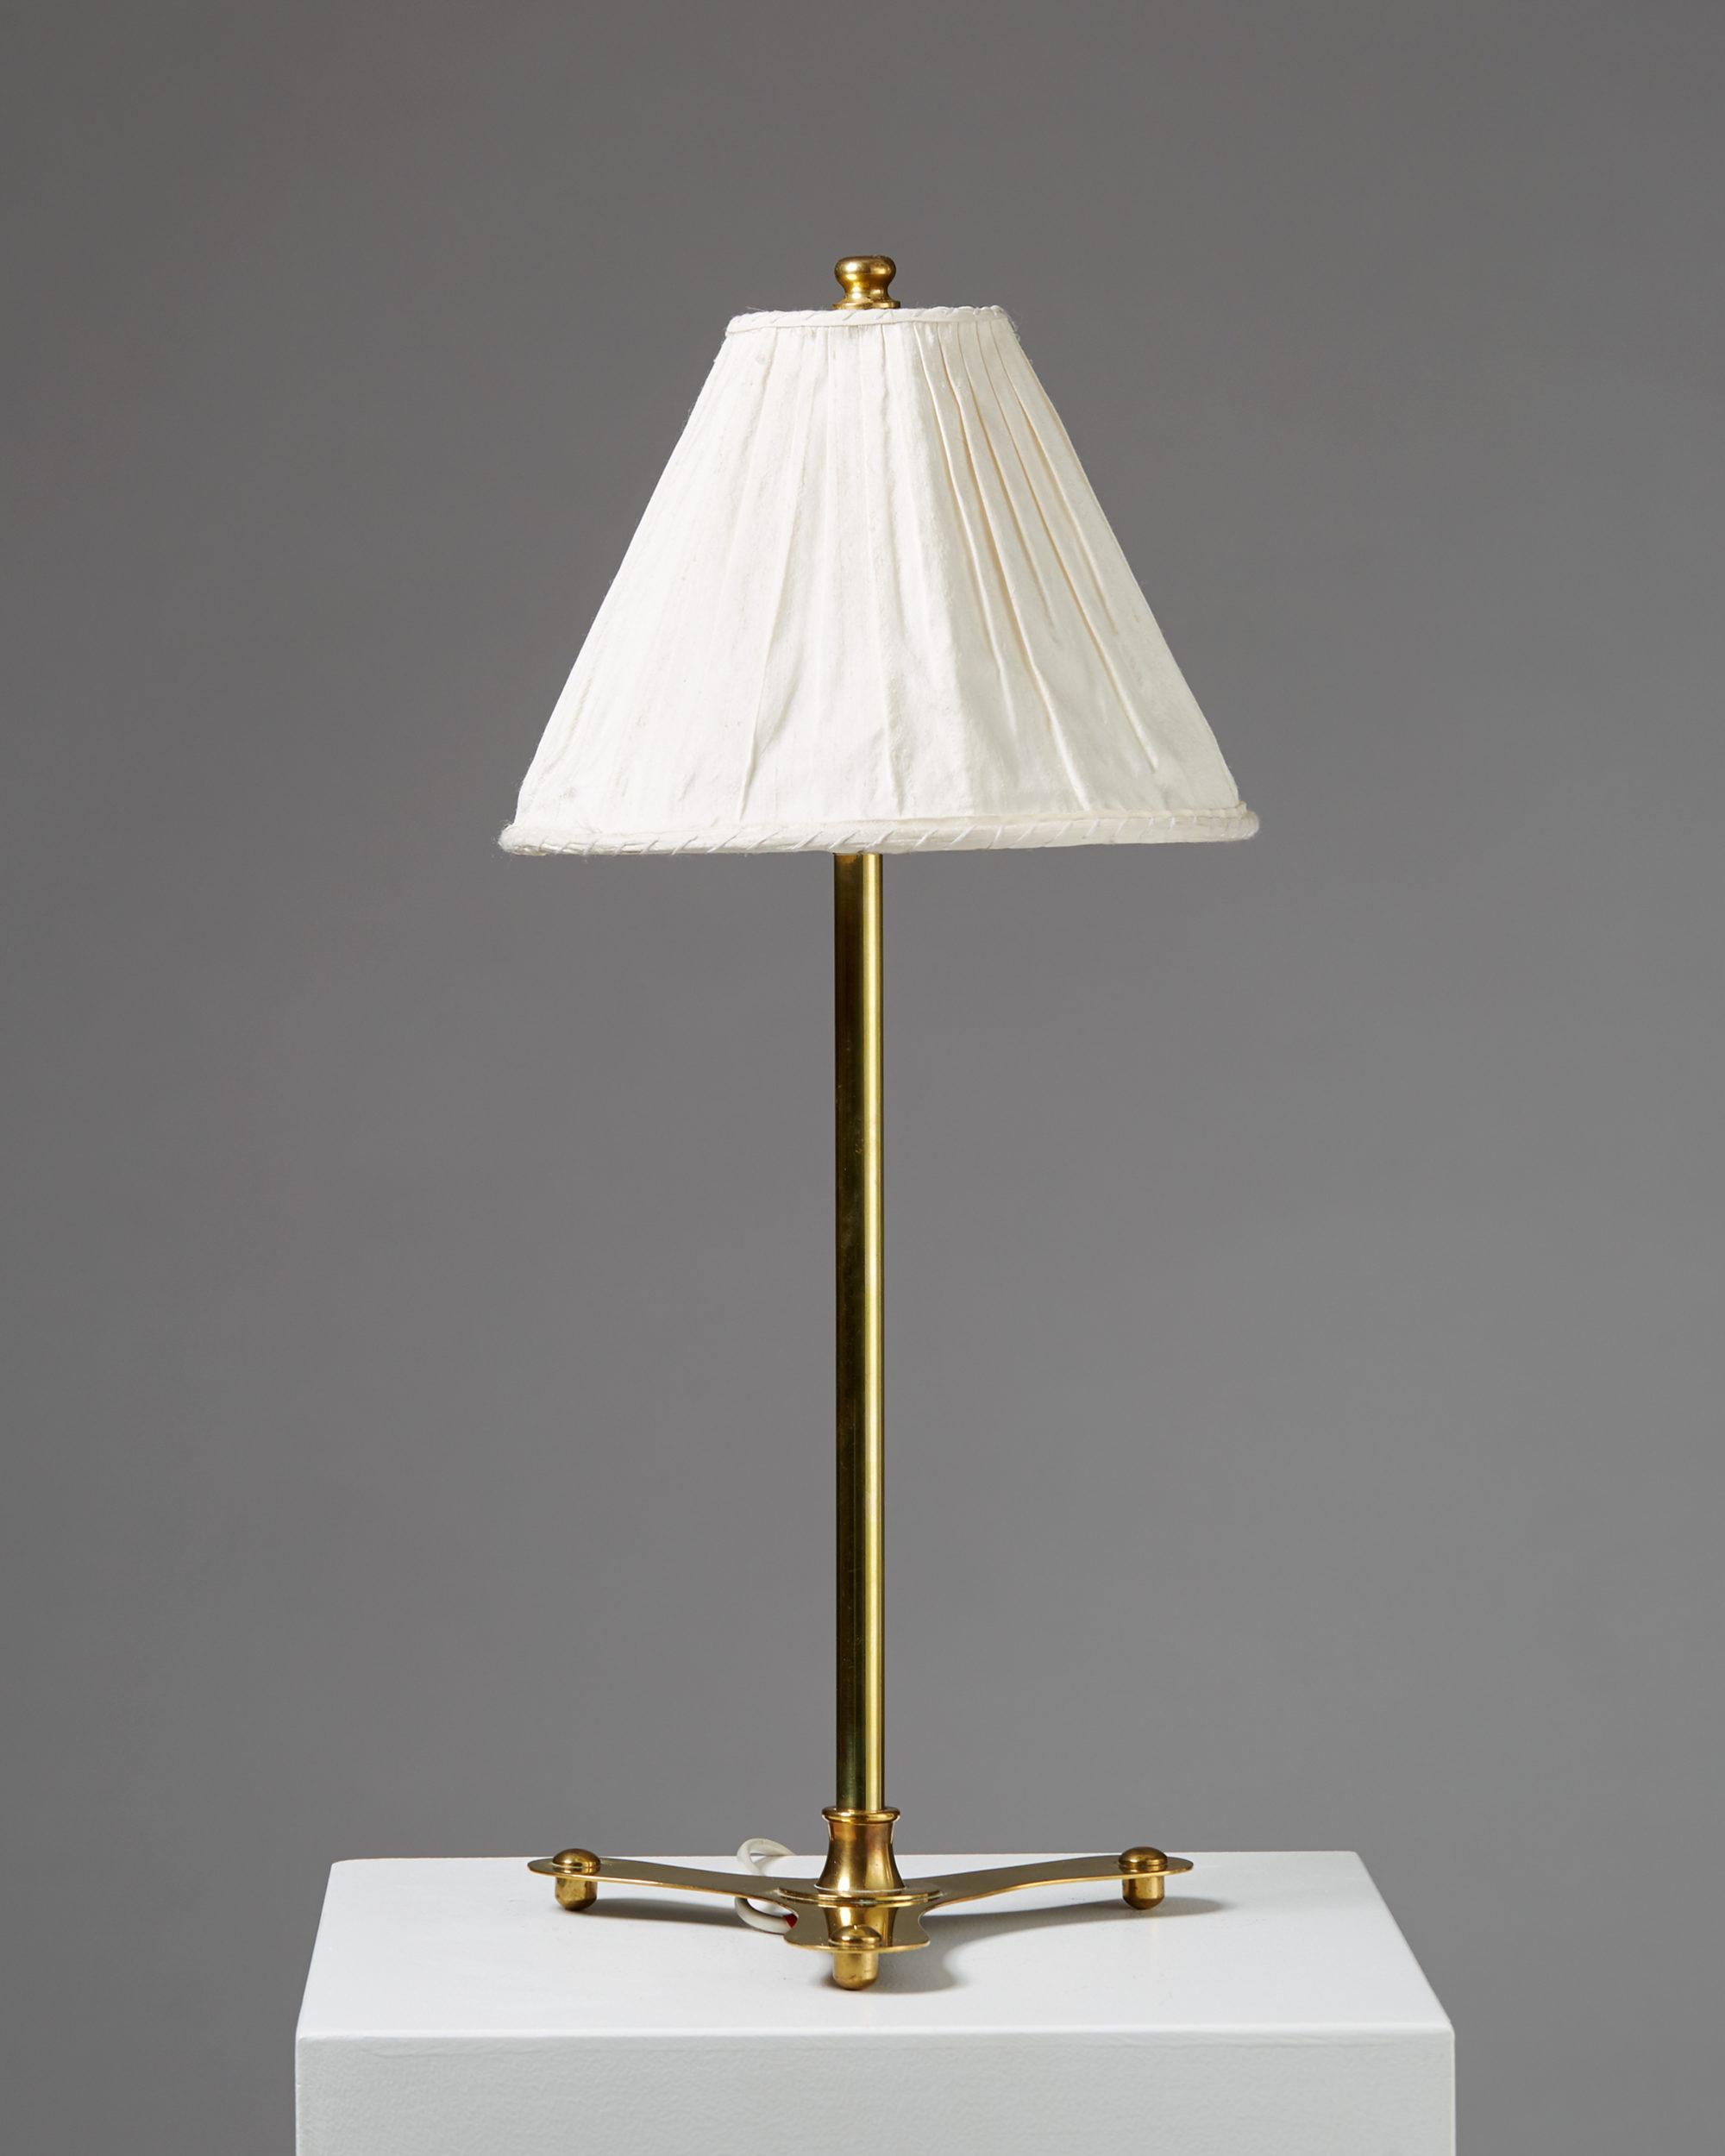 Brass. Table Lamp Model 2552 Designed by Josef Frank for Svenskt Tenn, Sweden, 1950s

Measures: H 49.5 cm

Josef Frank was a true European, he was also a pioneer of what would become classic 20th century Swedish design and the “Scandinavian Design